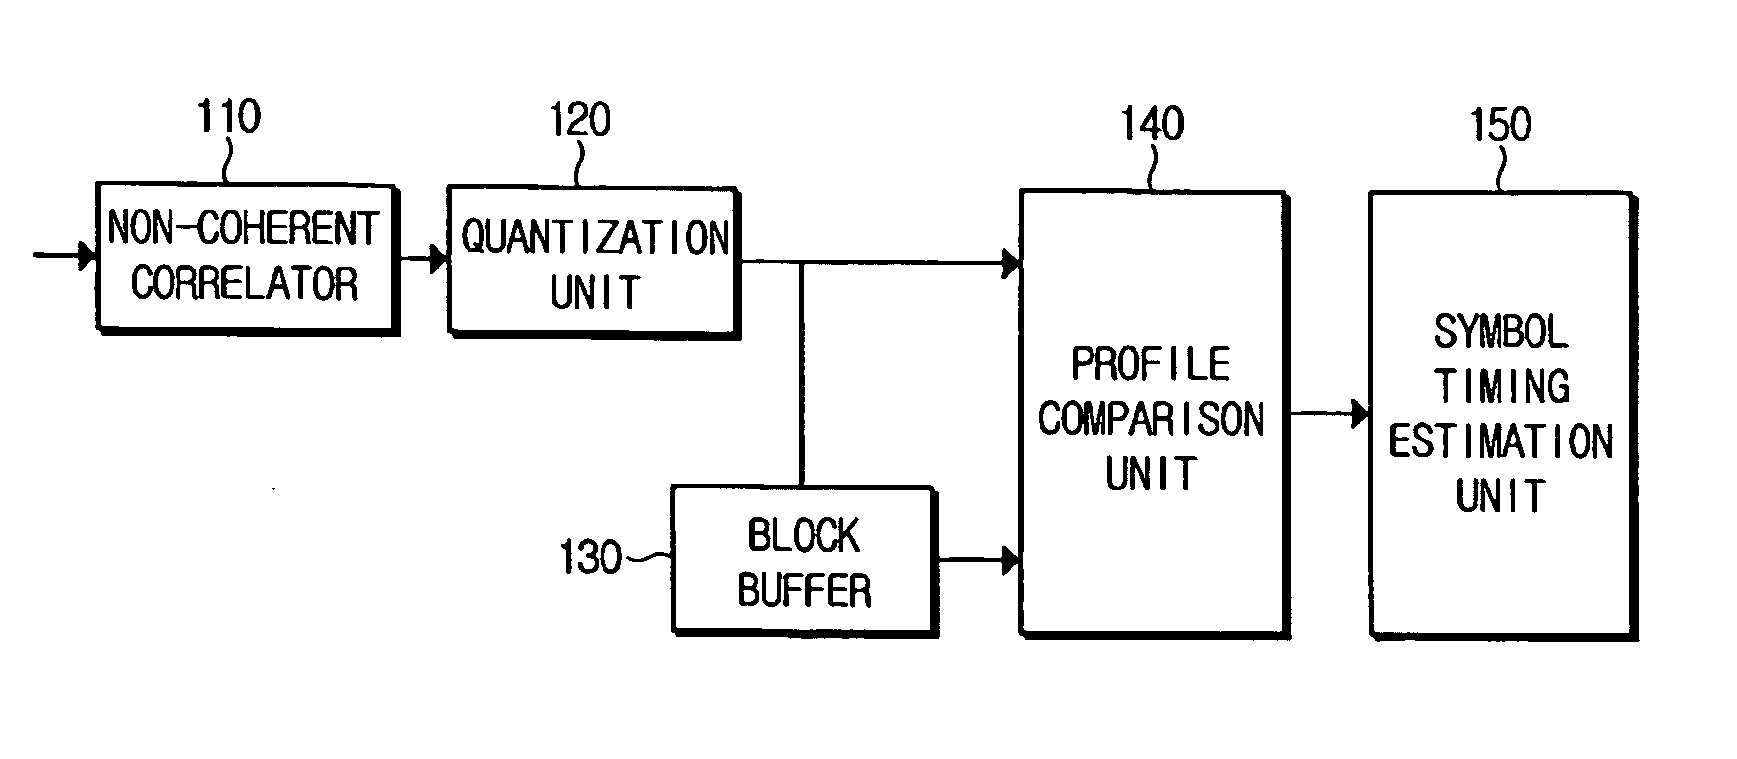 Symbol timing error detector that uses a channel profile of a digital receiver and a method of detecting a symbol timing error